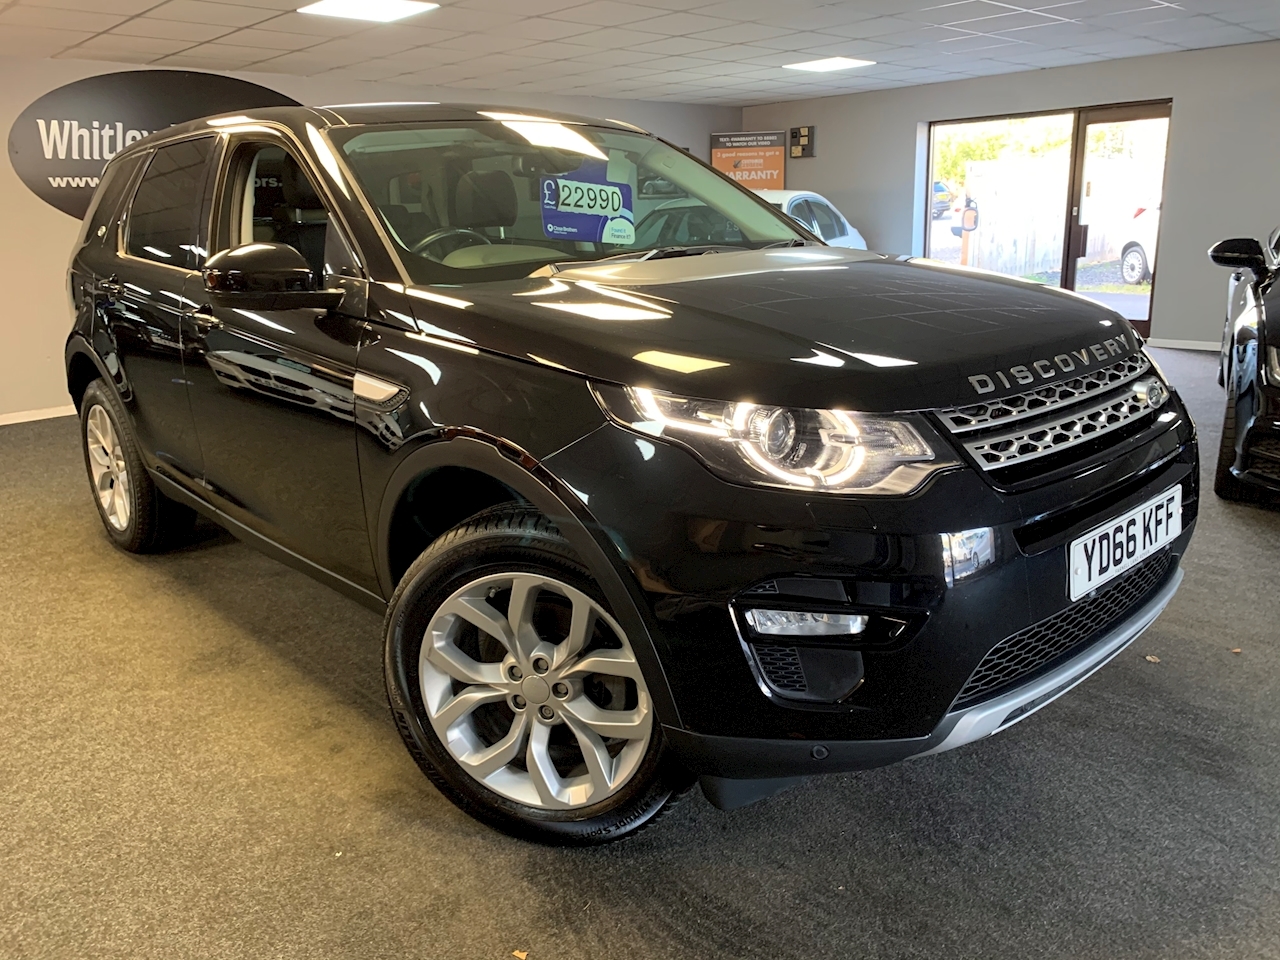 Discovery Sport HSE 2.0 5dr SUV Manual Diesel